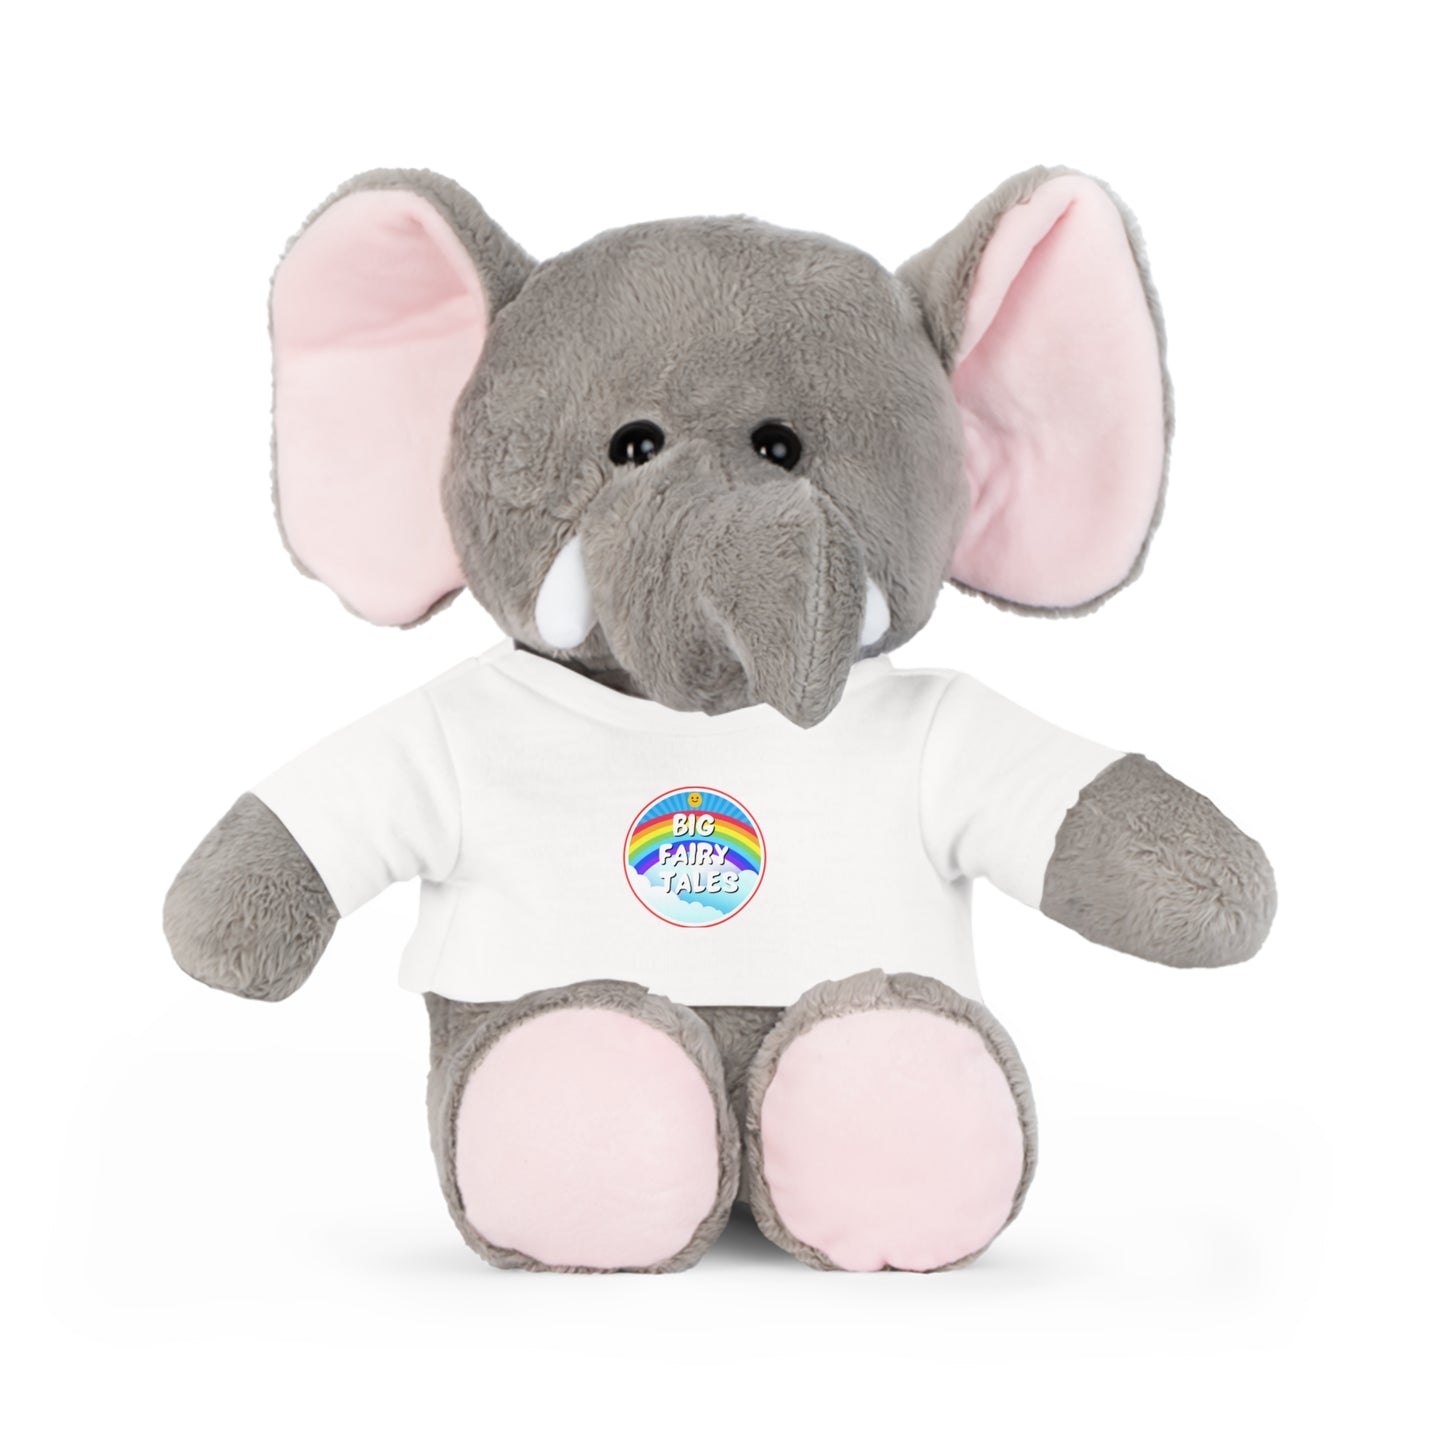 Big Fairy Tales By Schatar Plush Stuffed Animal With T-Shirt